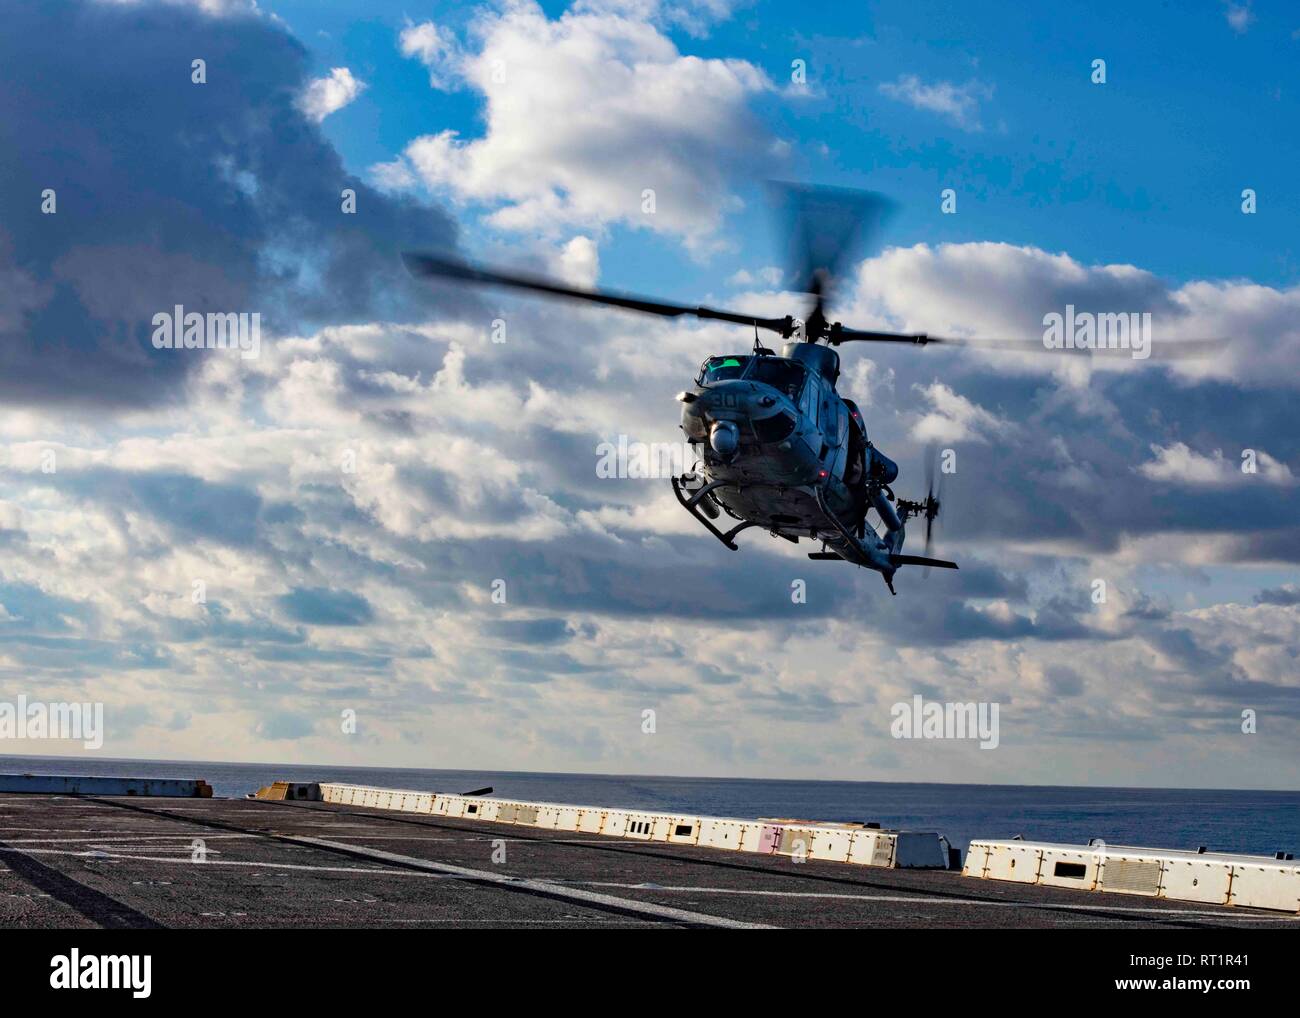 190221-N-HG389-0042 MEDITERRANEAN SEA (Feb. 21, 2019) A UH-1Y Huey helicopter assigned to the “Black Knights” of Marine Medium Tiltrotor Squadron (VMM) 264 (Reinforced) prepares to land on the flight deck of the San Antonio-class amphibious transport dock ship USS Arlington (LPD 24), Feb. 21, 2019. Arlington is on a scheduled deployment as part of the Kearsarge Amphibious Ready Group in support of maritime security operations, crisis response and theater security cooperation, while also providing a forward naval presence. (U.S. Navy photo by Mass Communication Specialist 2nd Class Brandon Park Stock Photo